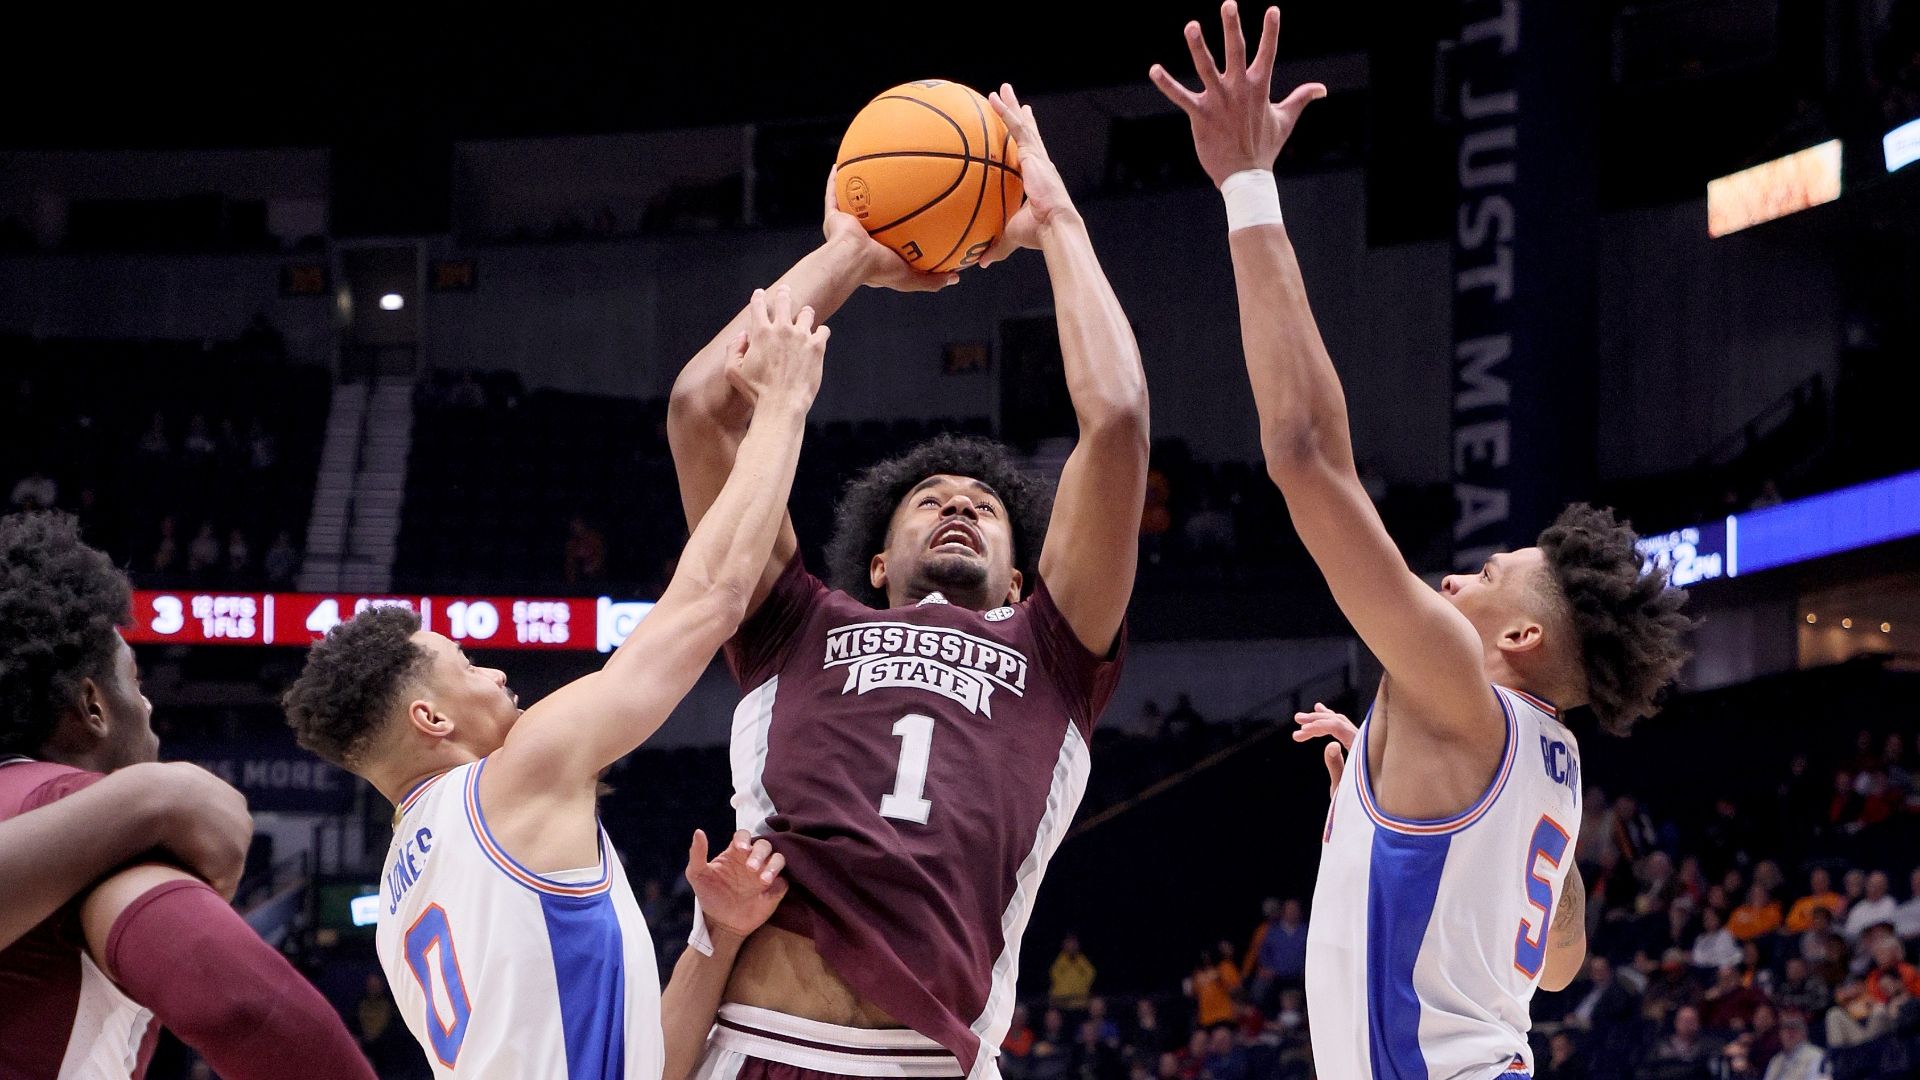 Smith wills MS State to victory vs. UF in OT thriller